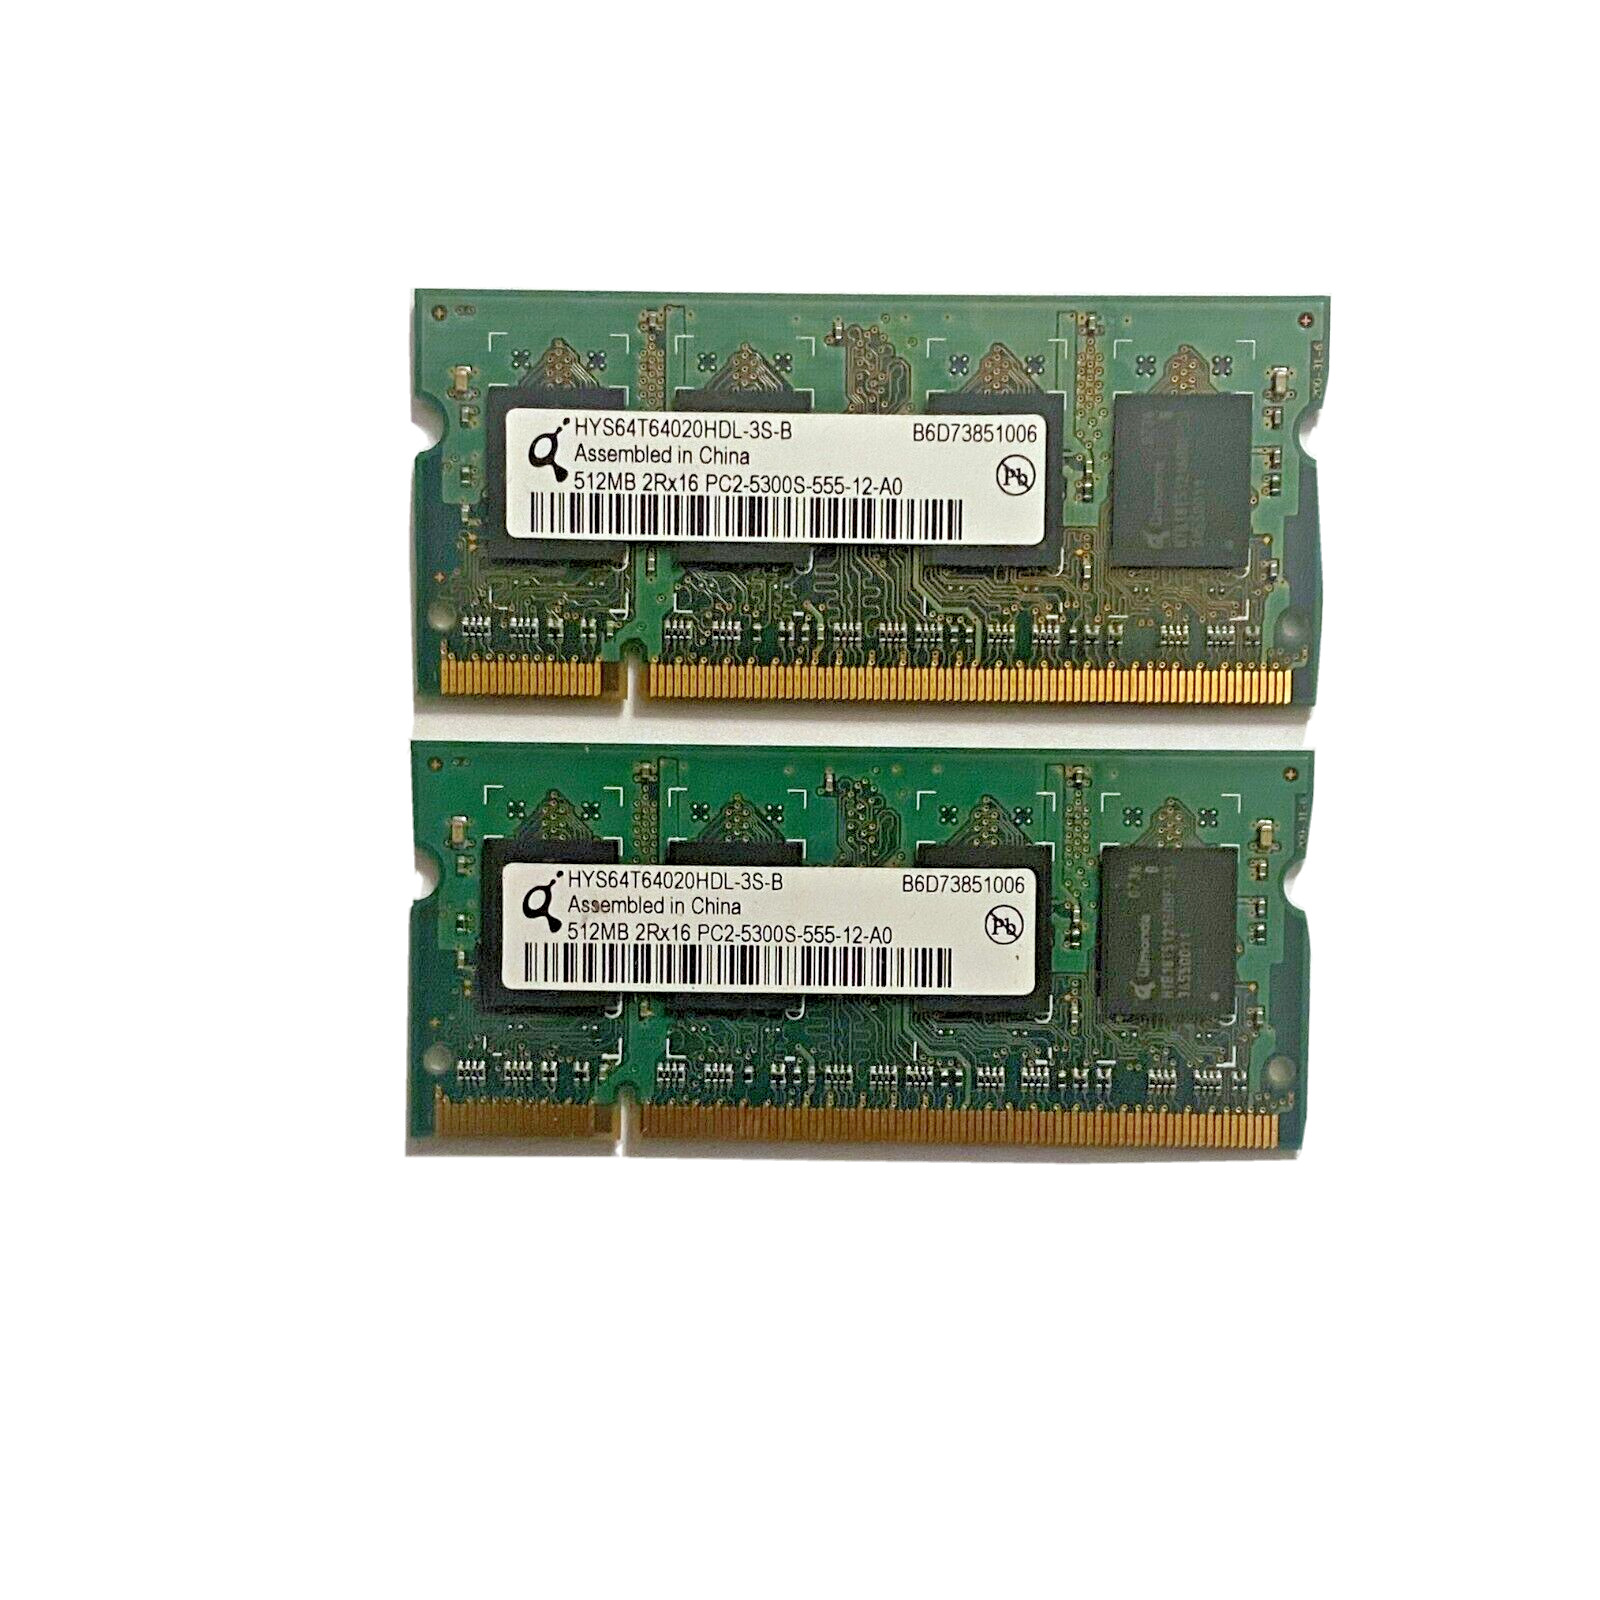 1 GB (2 X 512 MB ) HYNIX DDR2 SO-DIMM Laptop Memory RAM PC2-5300S Tested Working